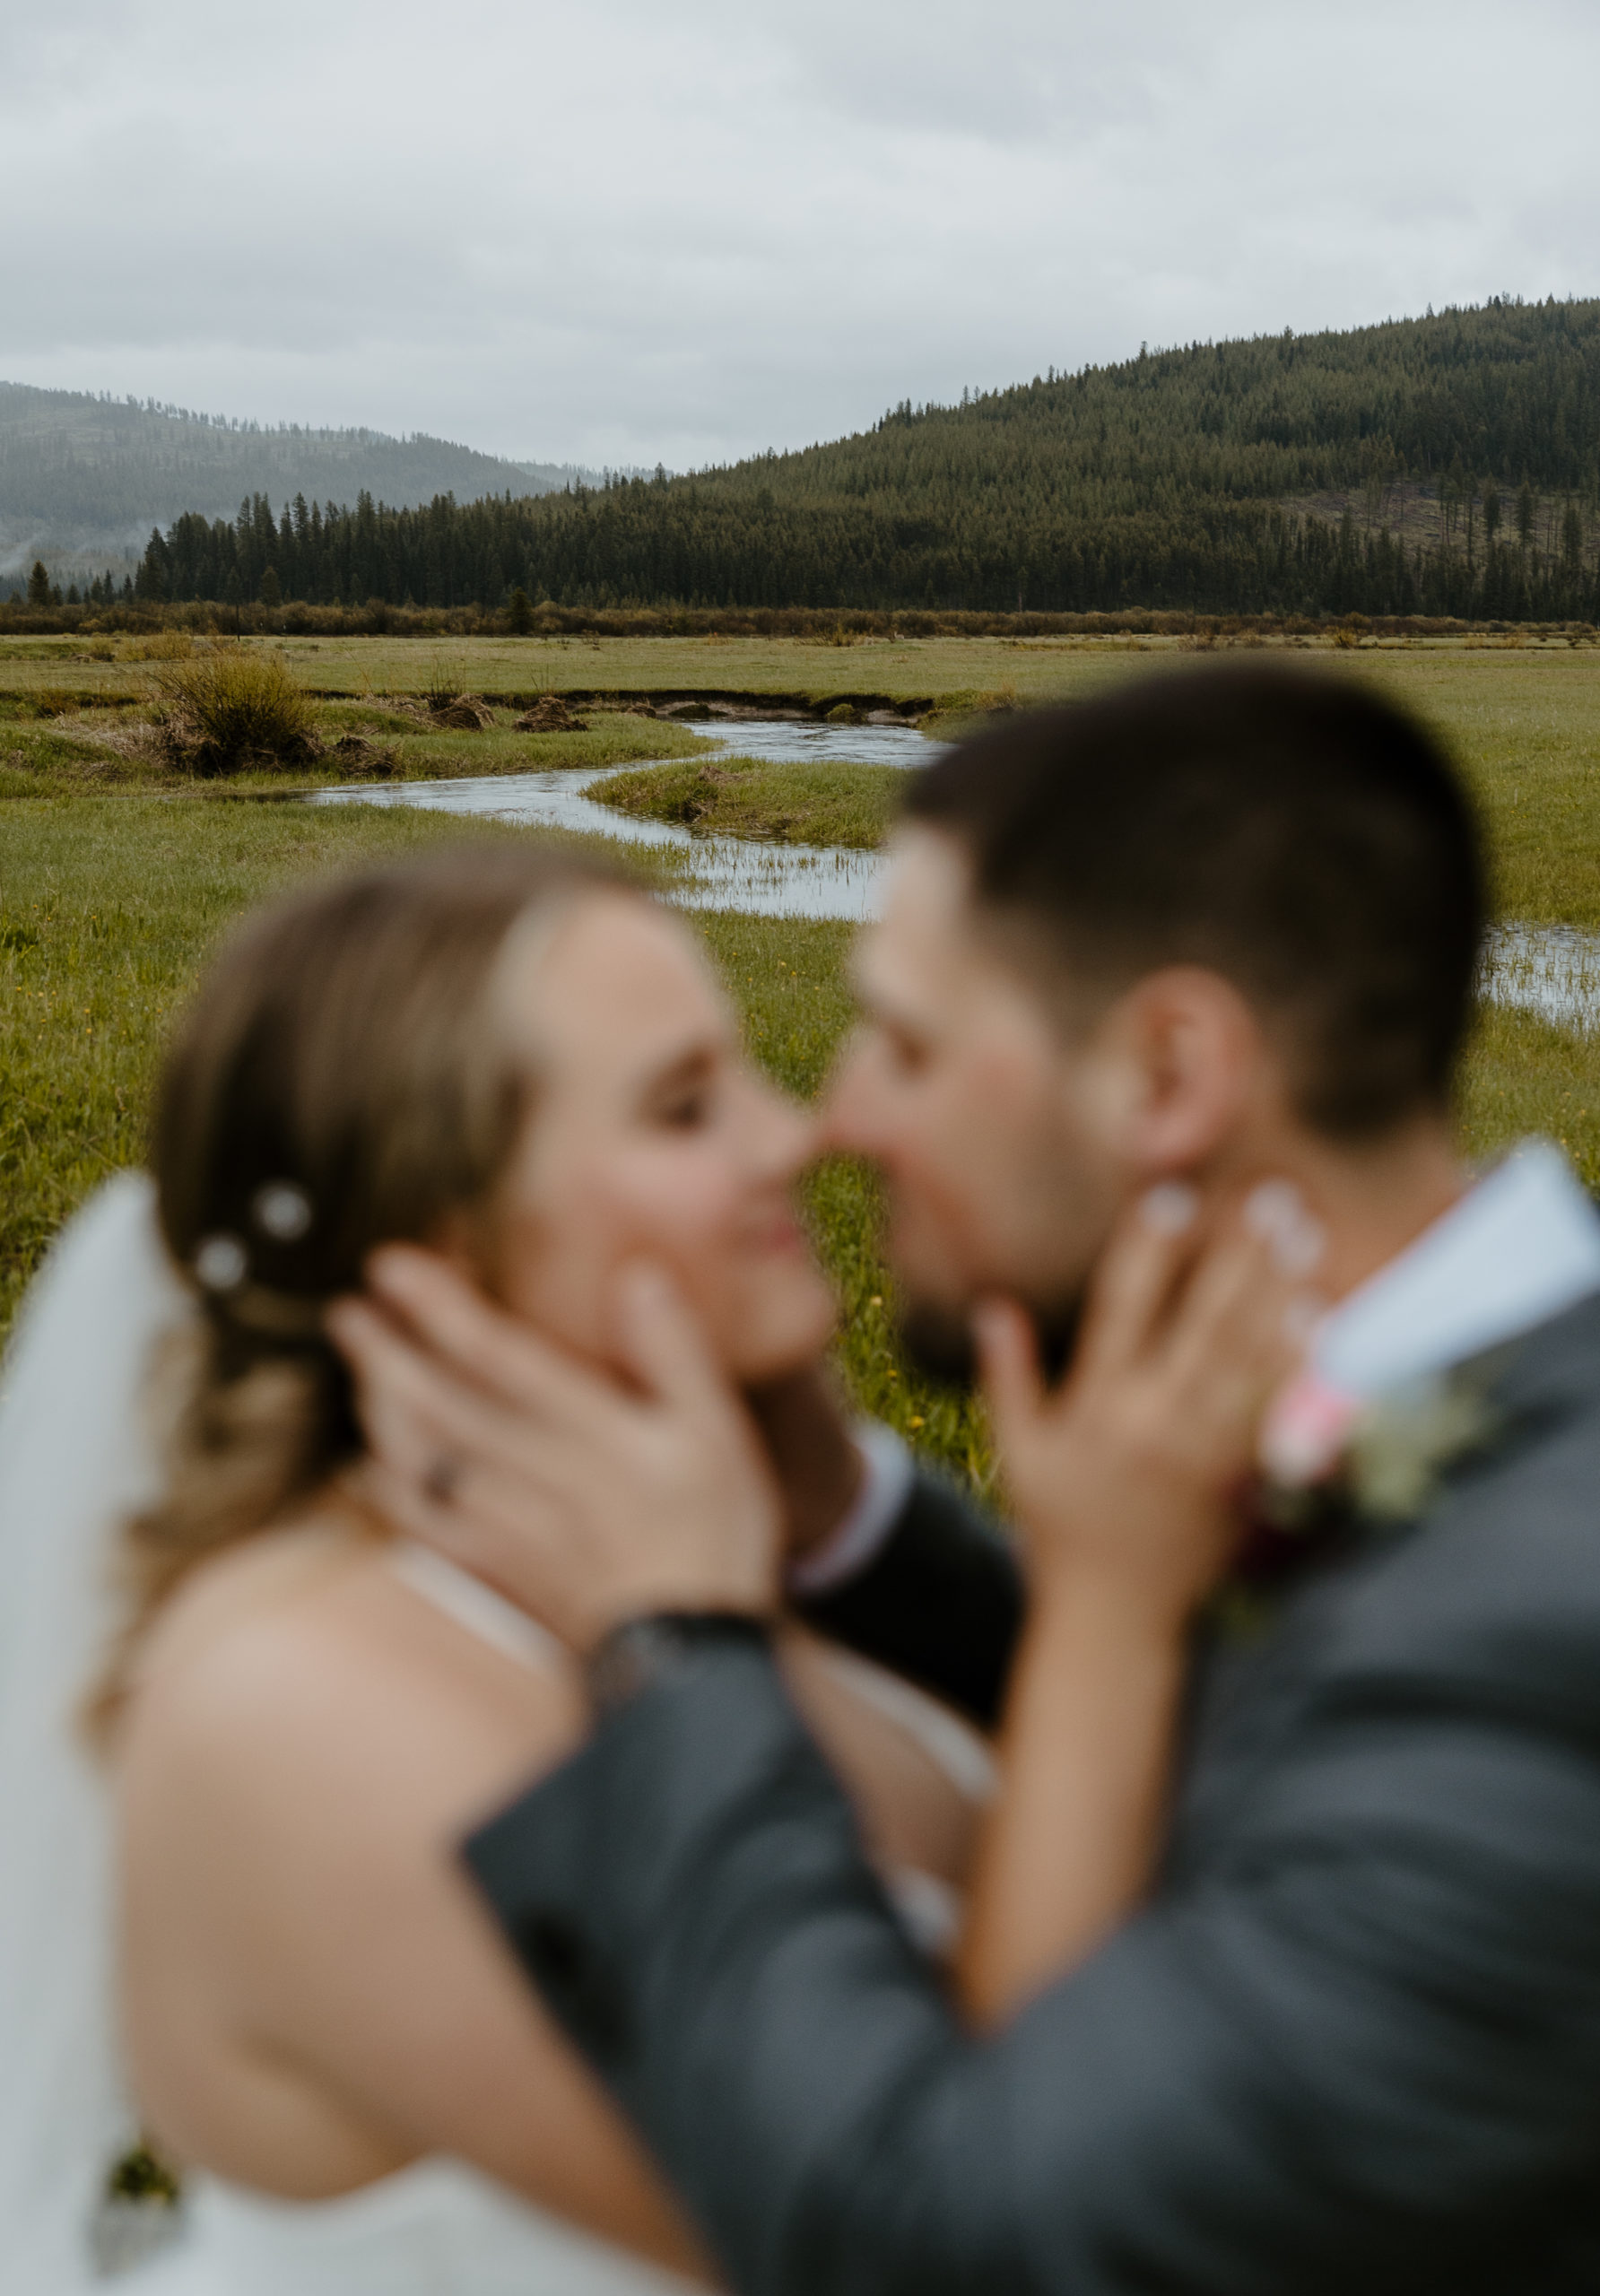 Husband and wife embracing in front of mountains and meadow view